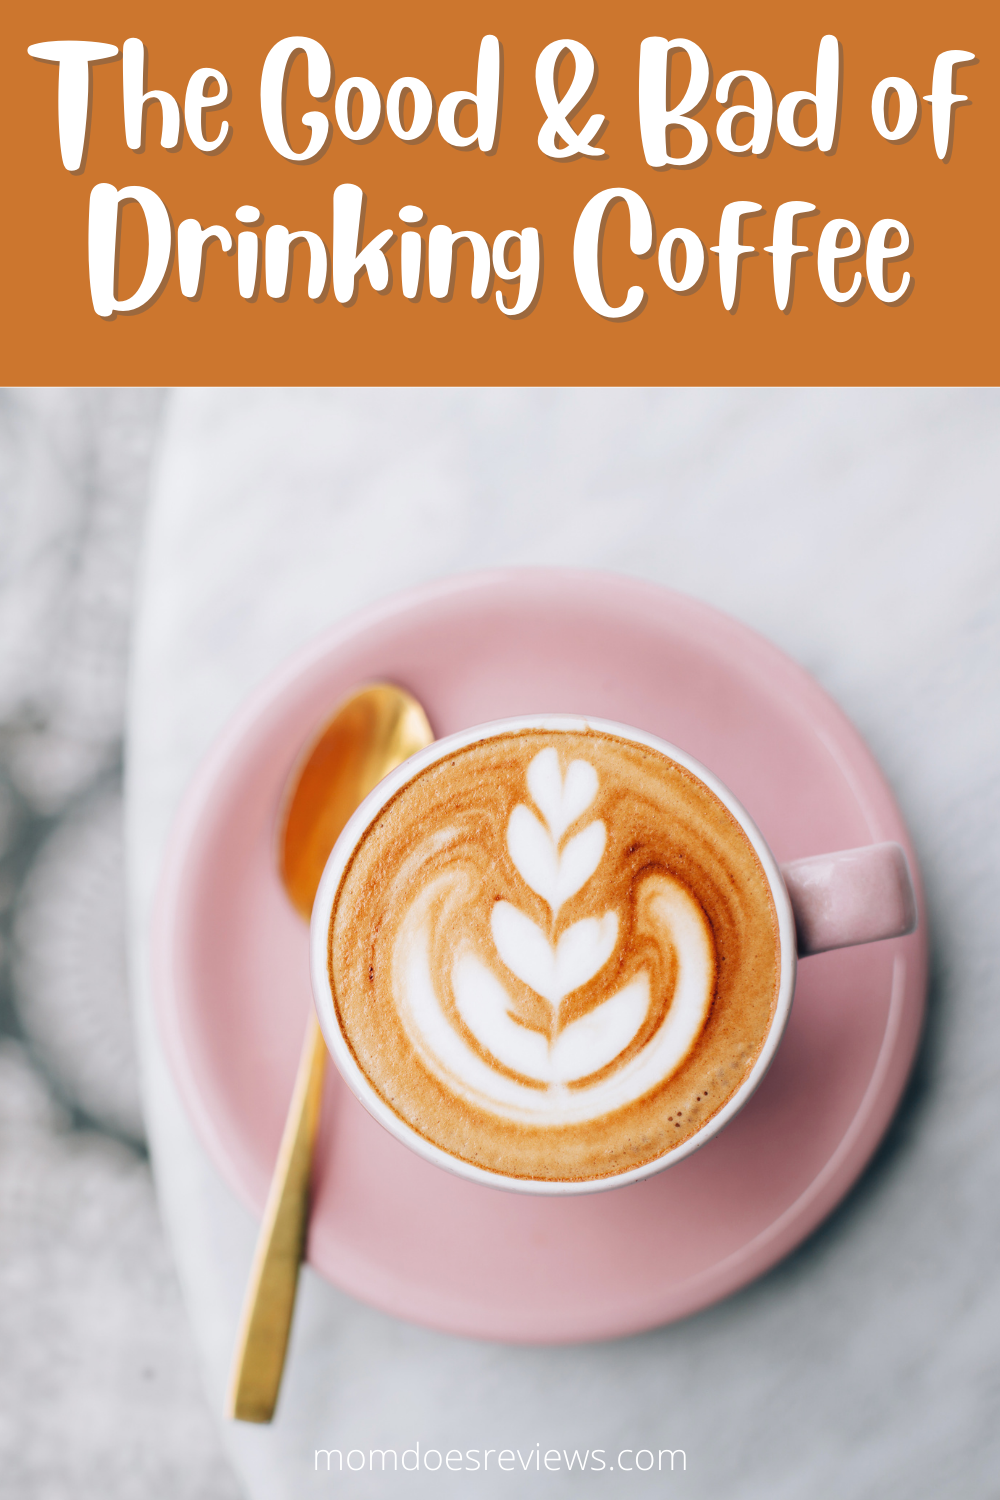 Various Advantages And Disadvantages Of Drinking Coffee